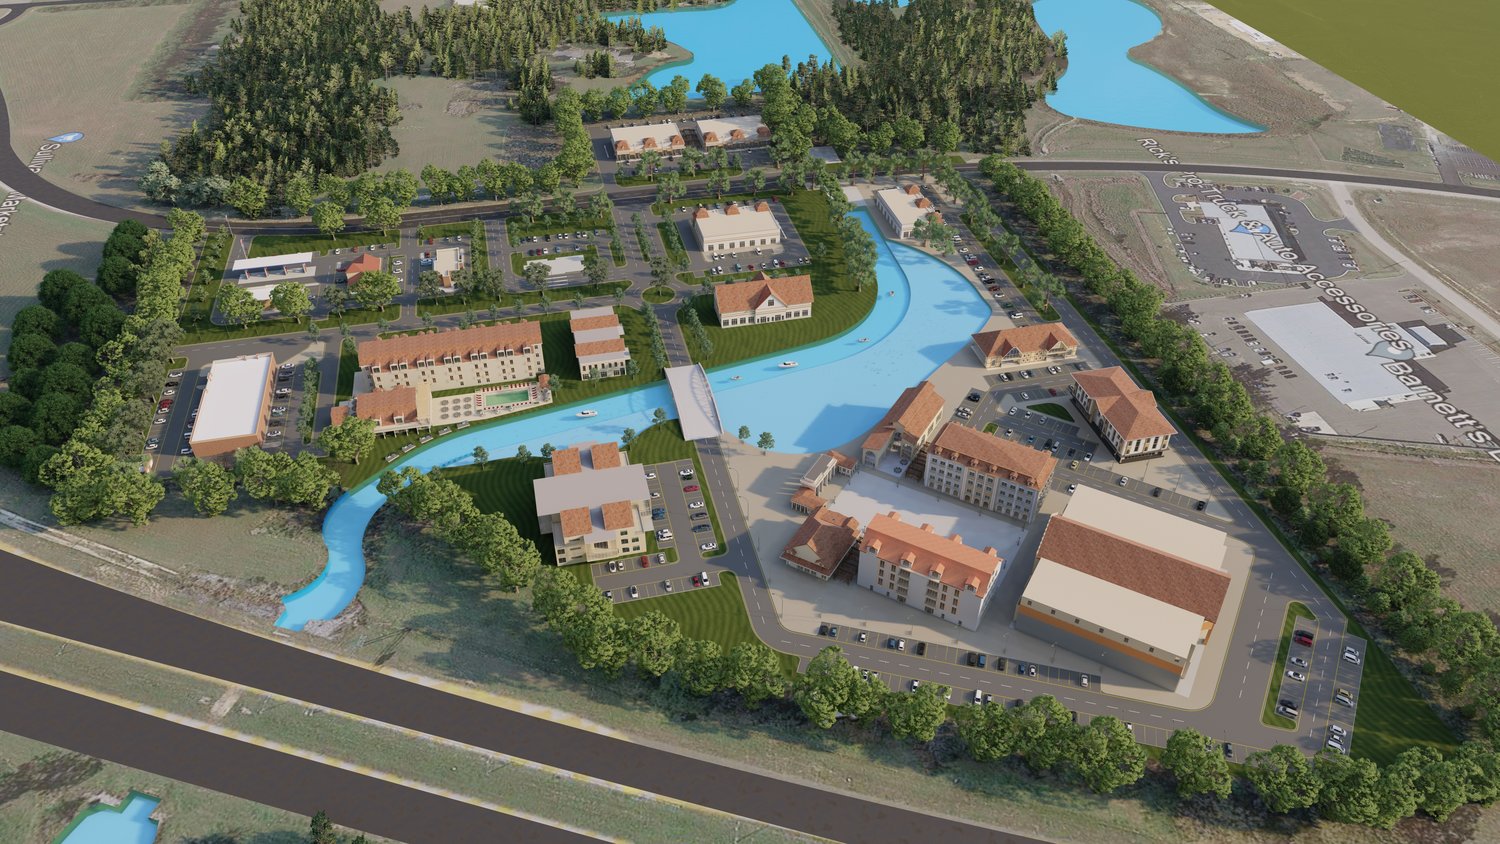 An overhead rendering of Germantown Village, which plans for two hotels, Springhill Suites and Home 2 Hotel.